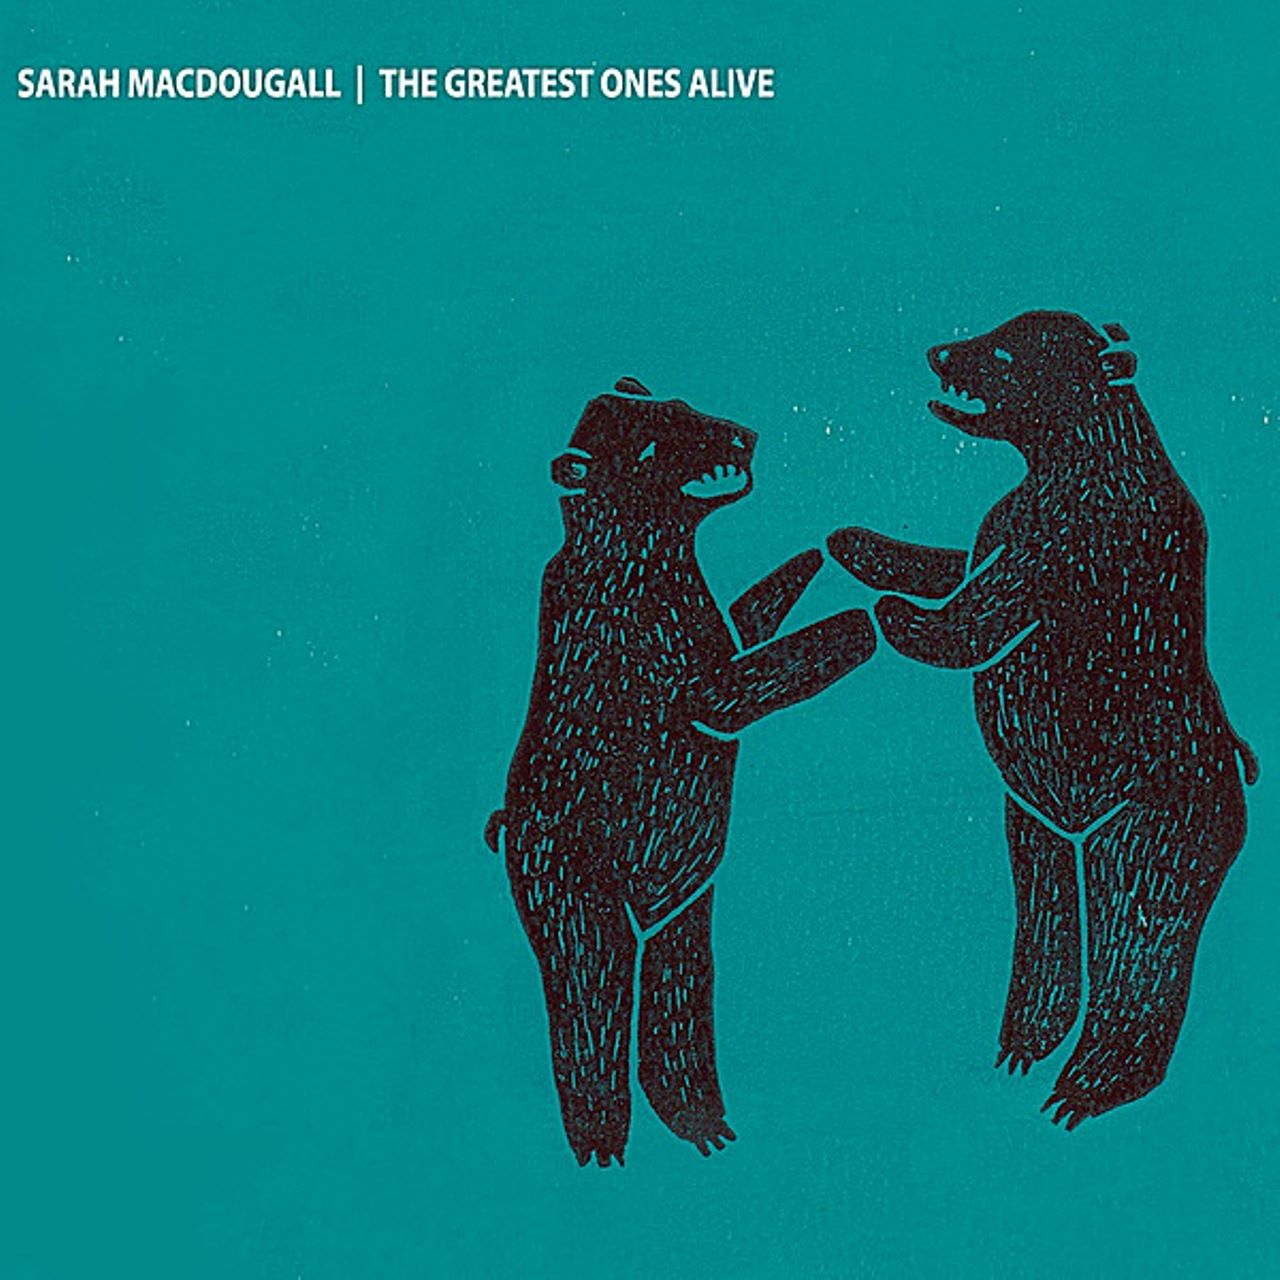 Sarah MacDougall - The Greatest Ones Alive cover album